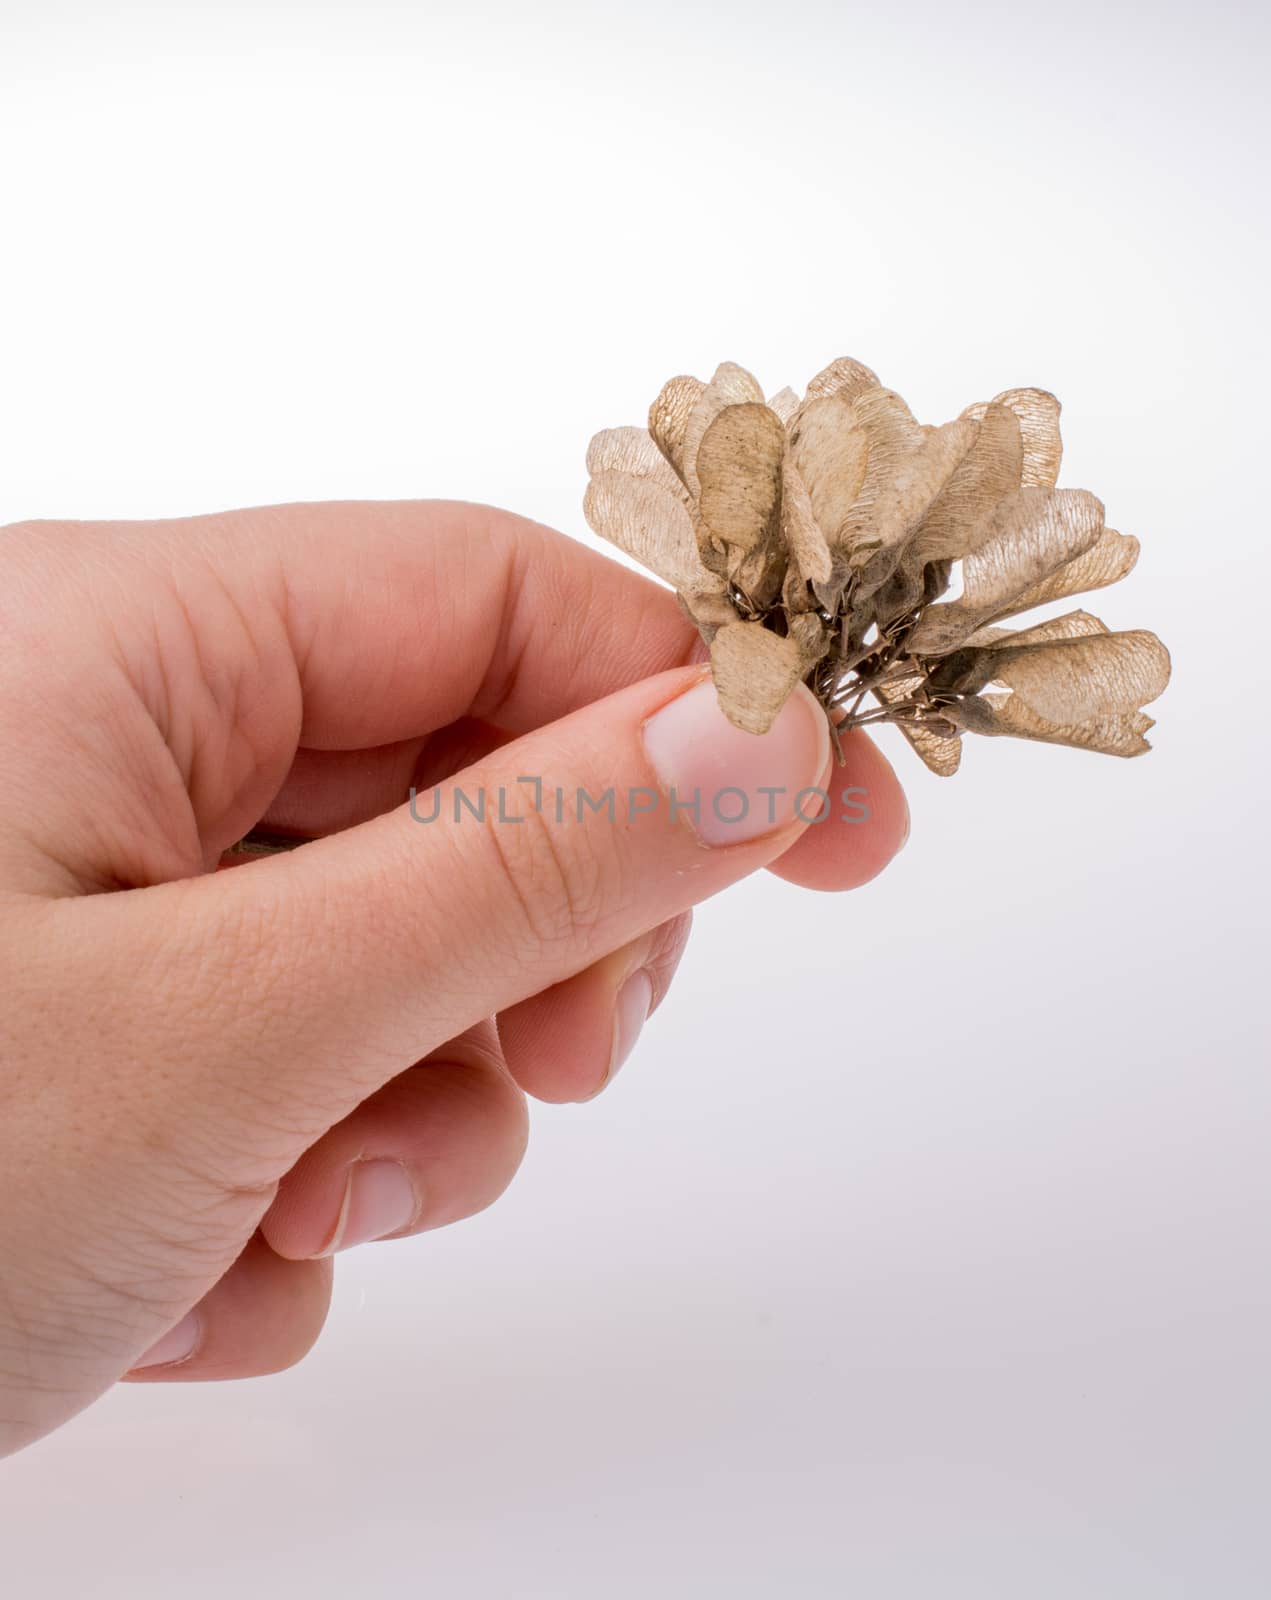 Dry leaves in hand on white